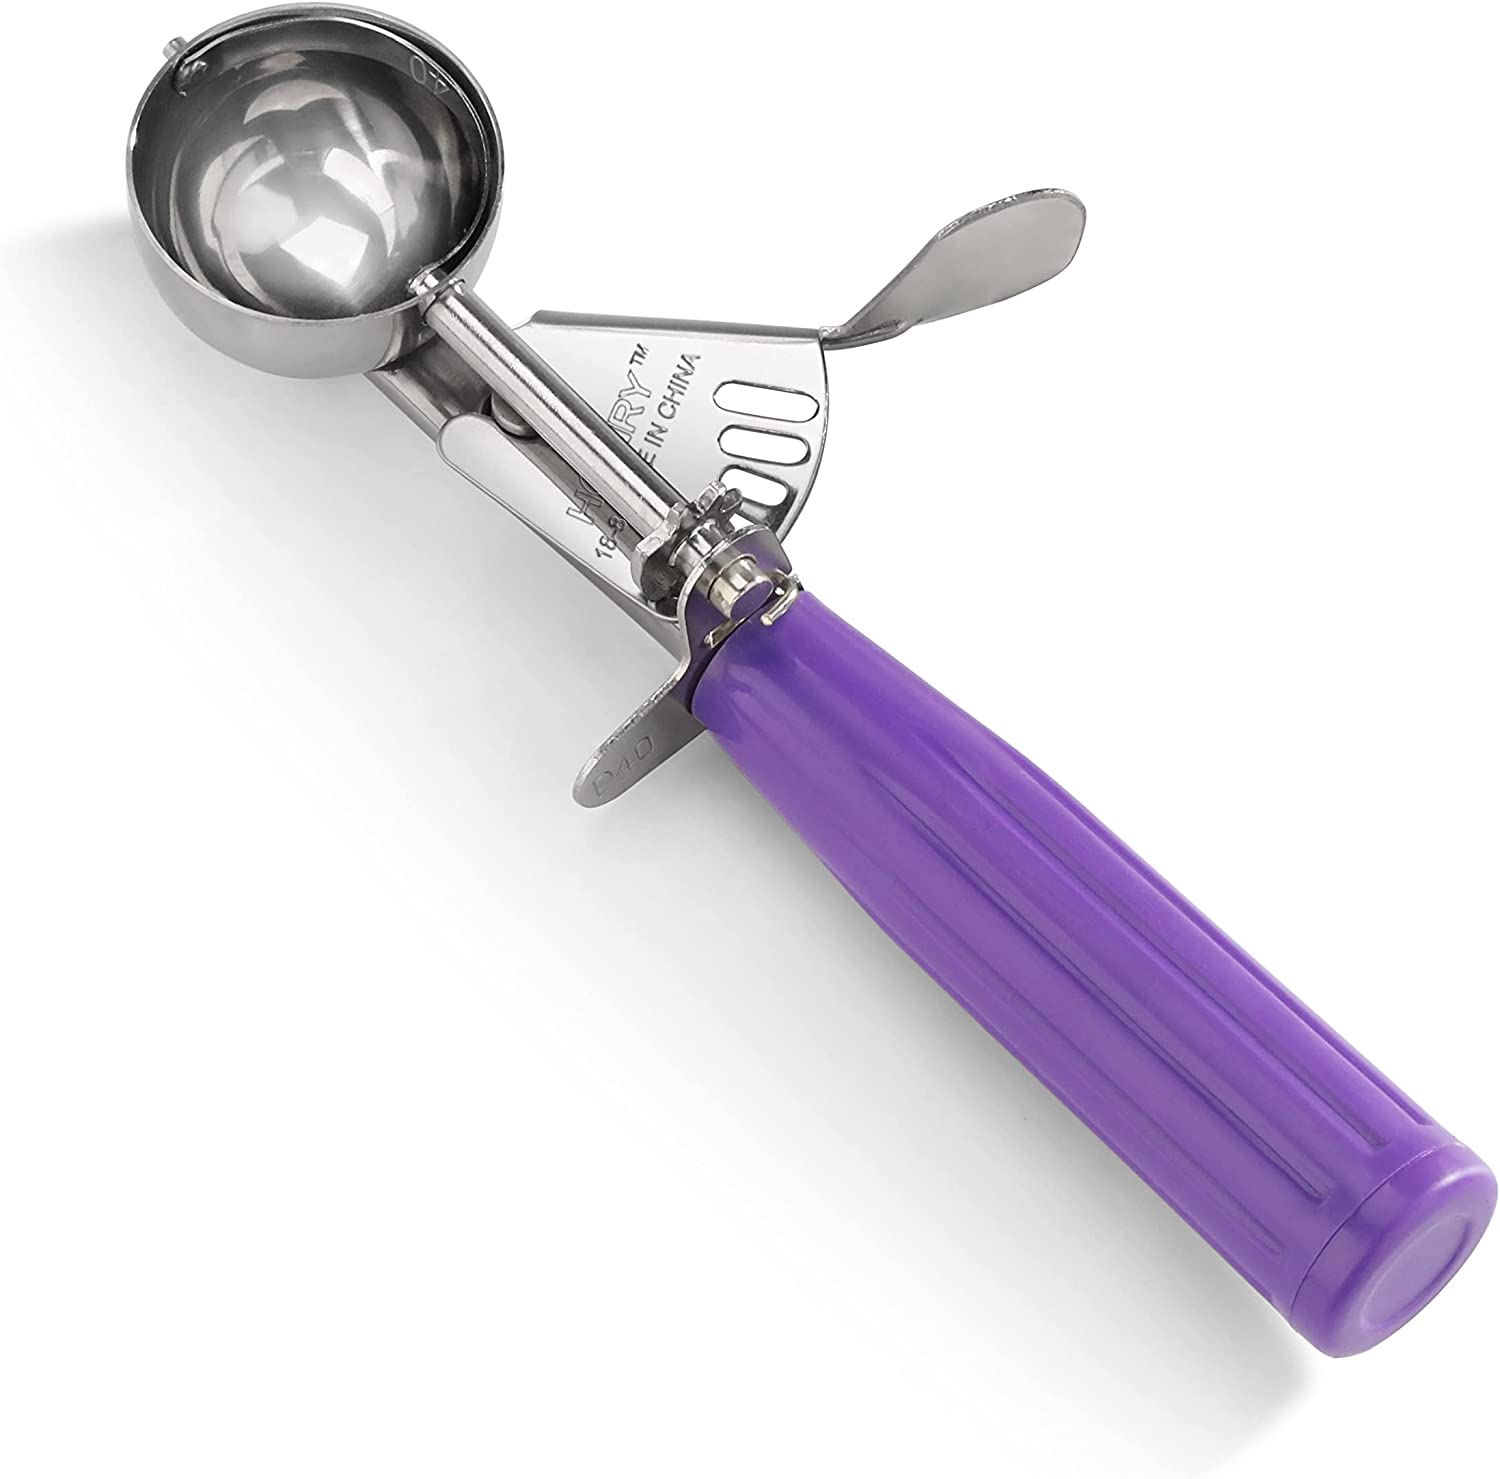 Beautiful Ice Cream Scoop with Cast Zinc Head, Store Only Item